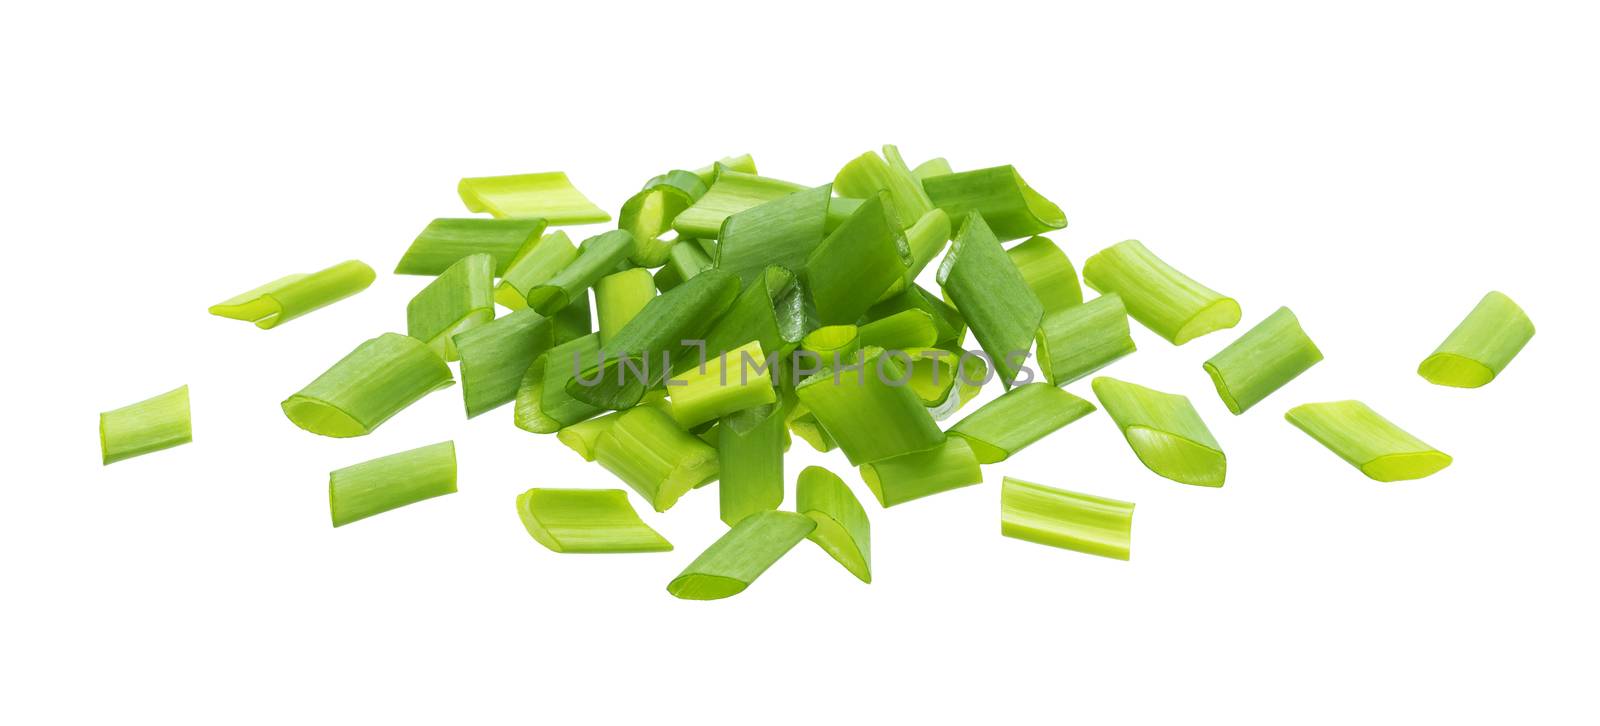 Chopped chives, fresh green onions isolated on white background by xamtiw